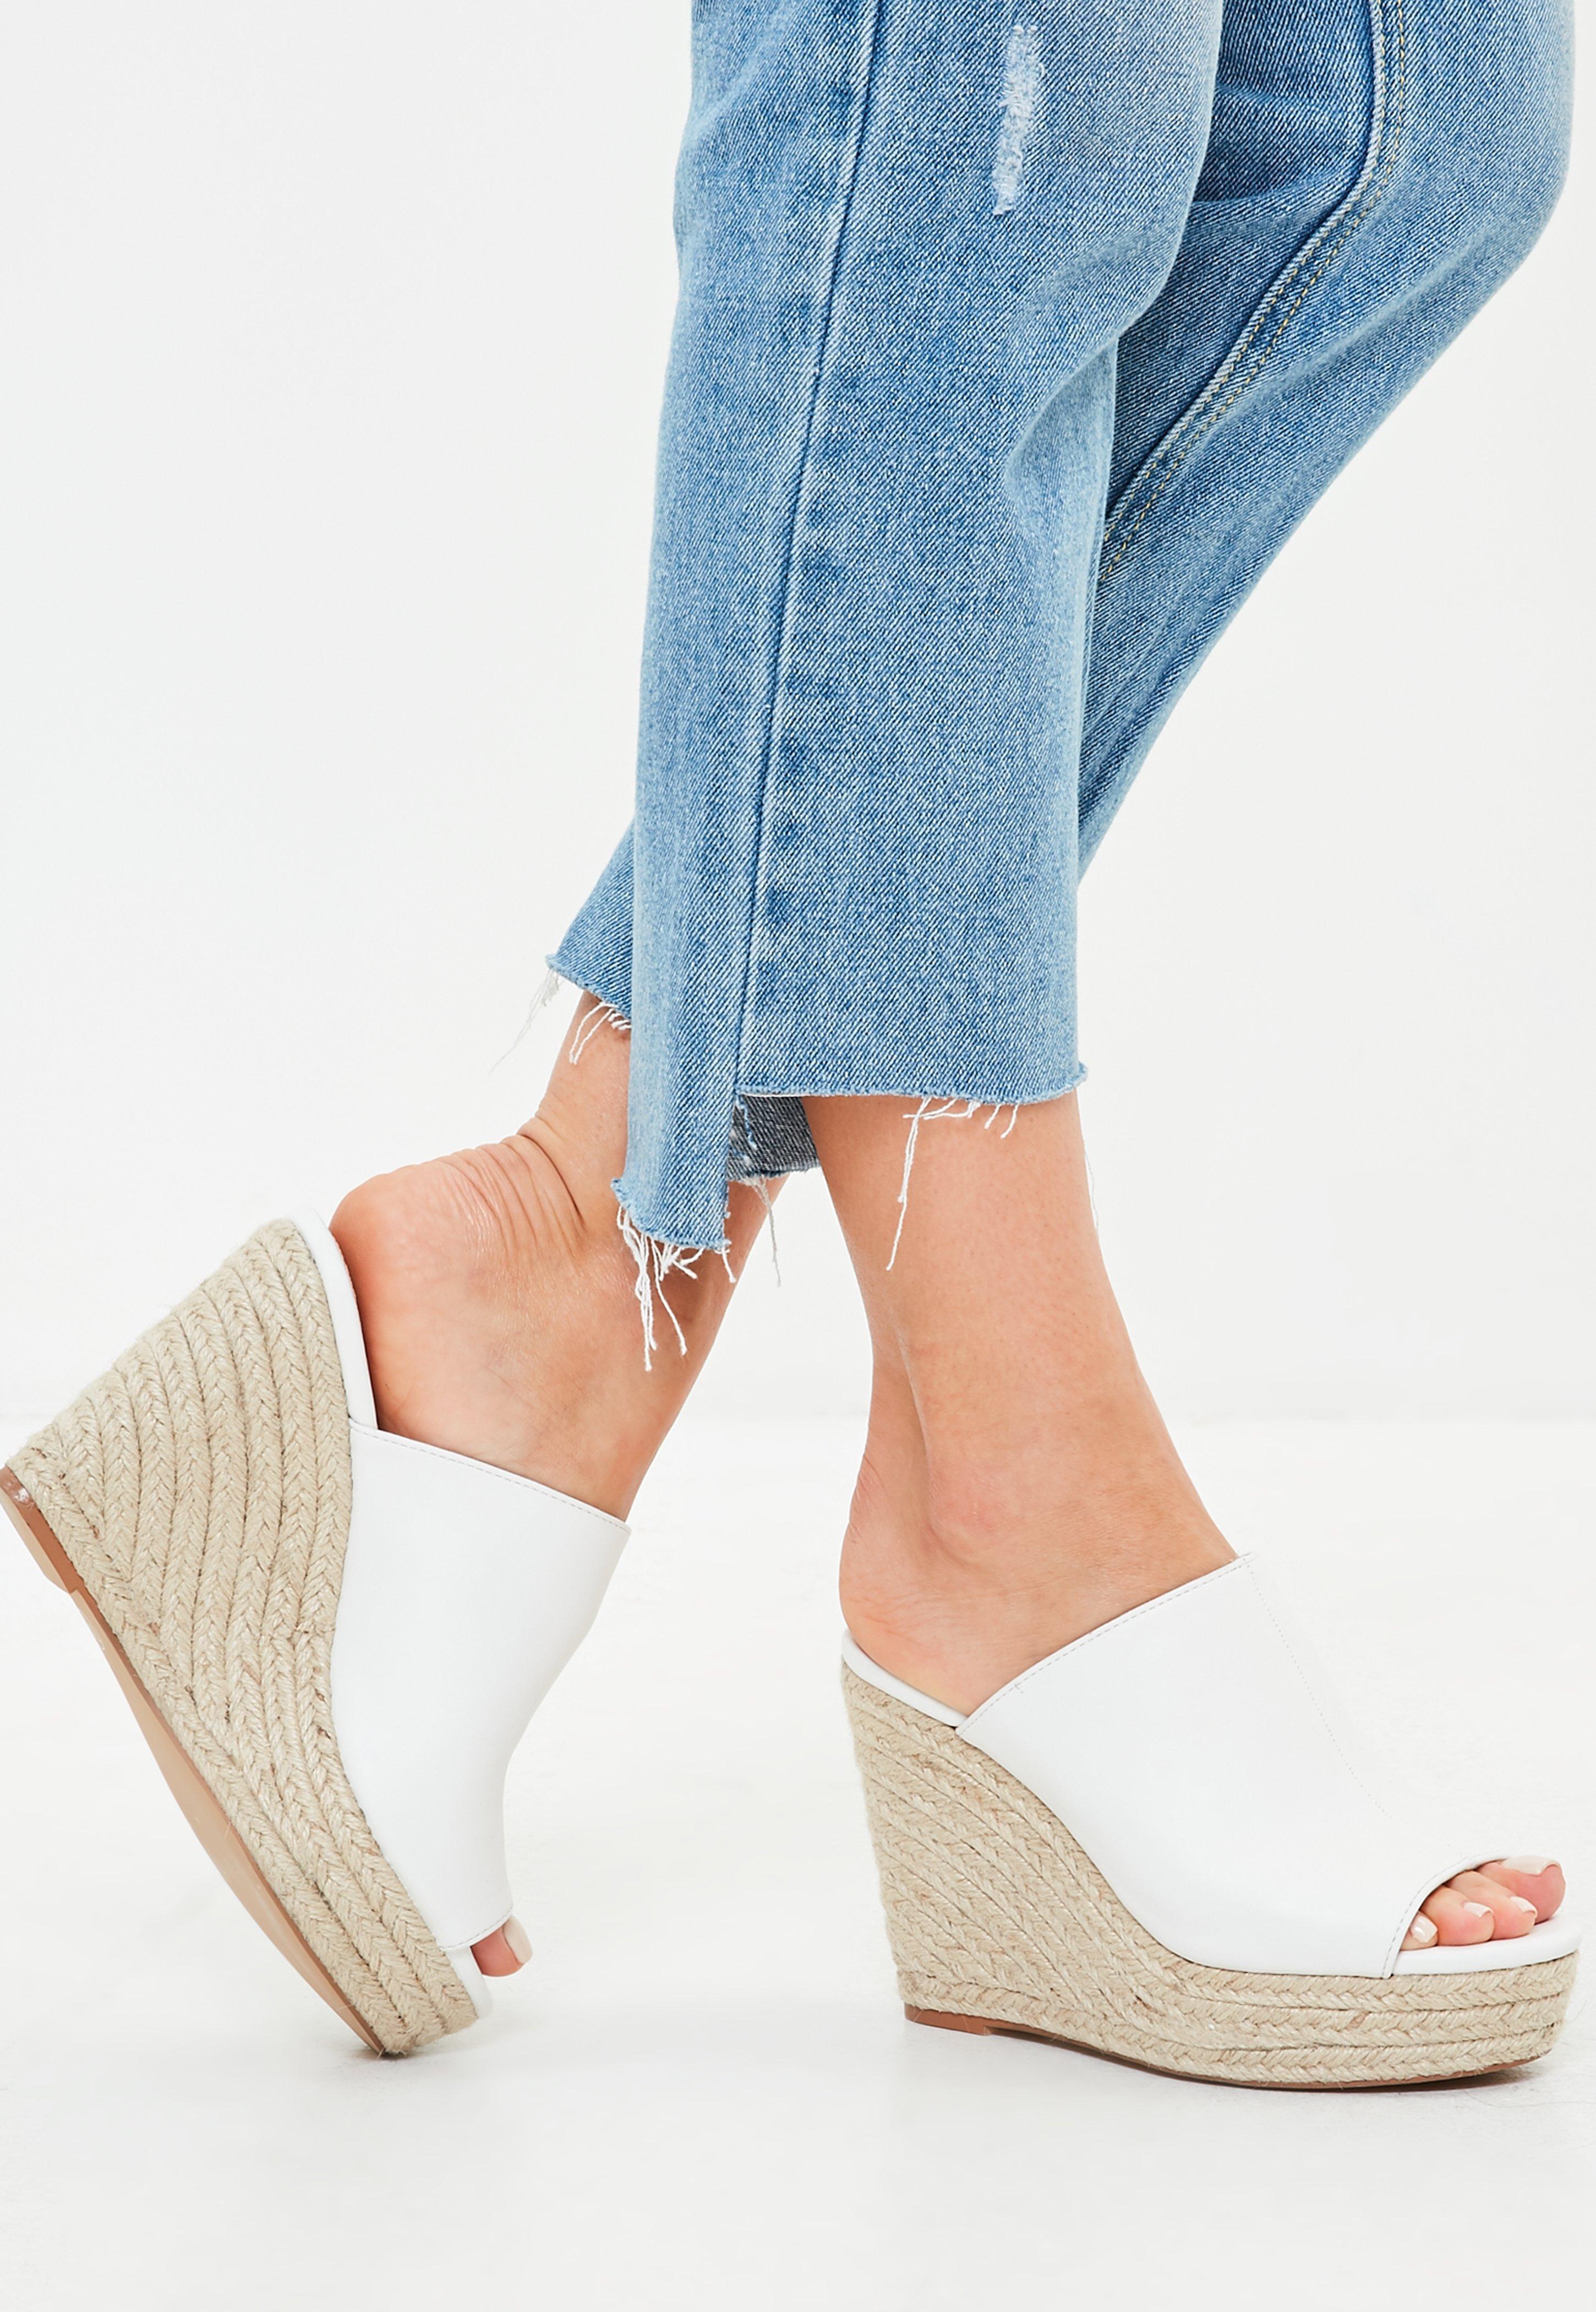 Buy > faux leather wedges > in stock